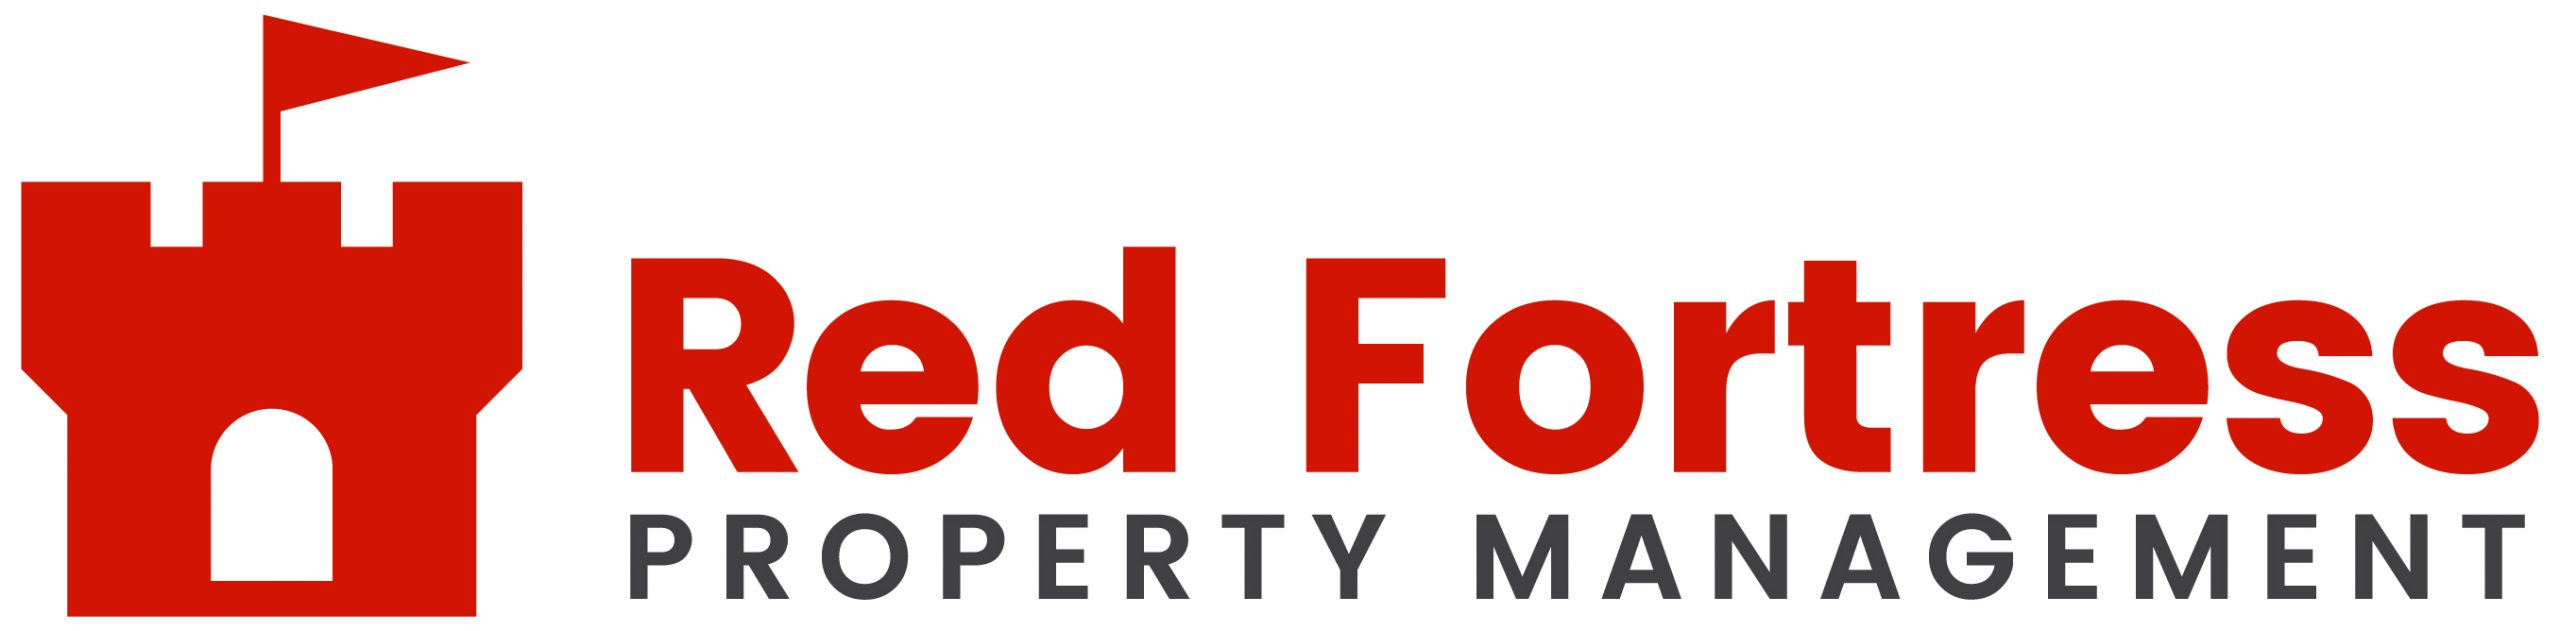 Red Fortress Property Management